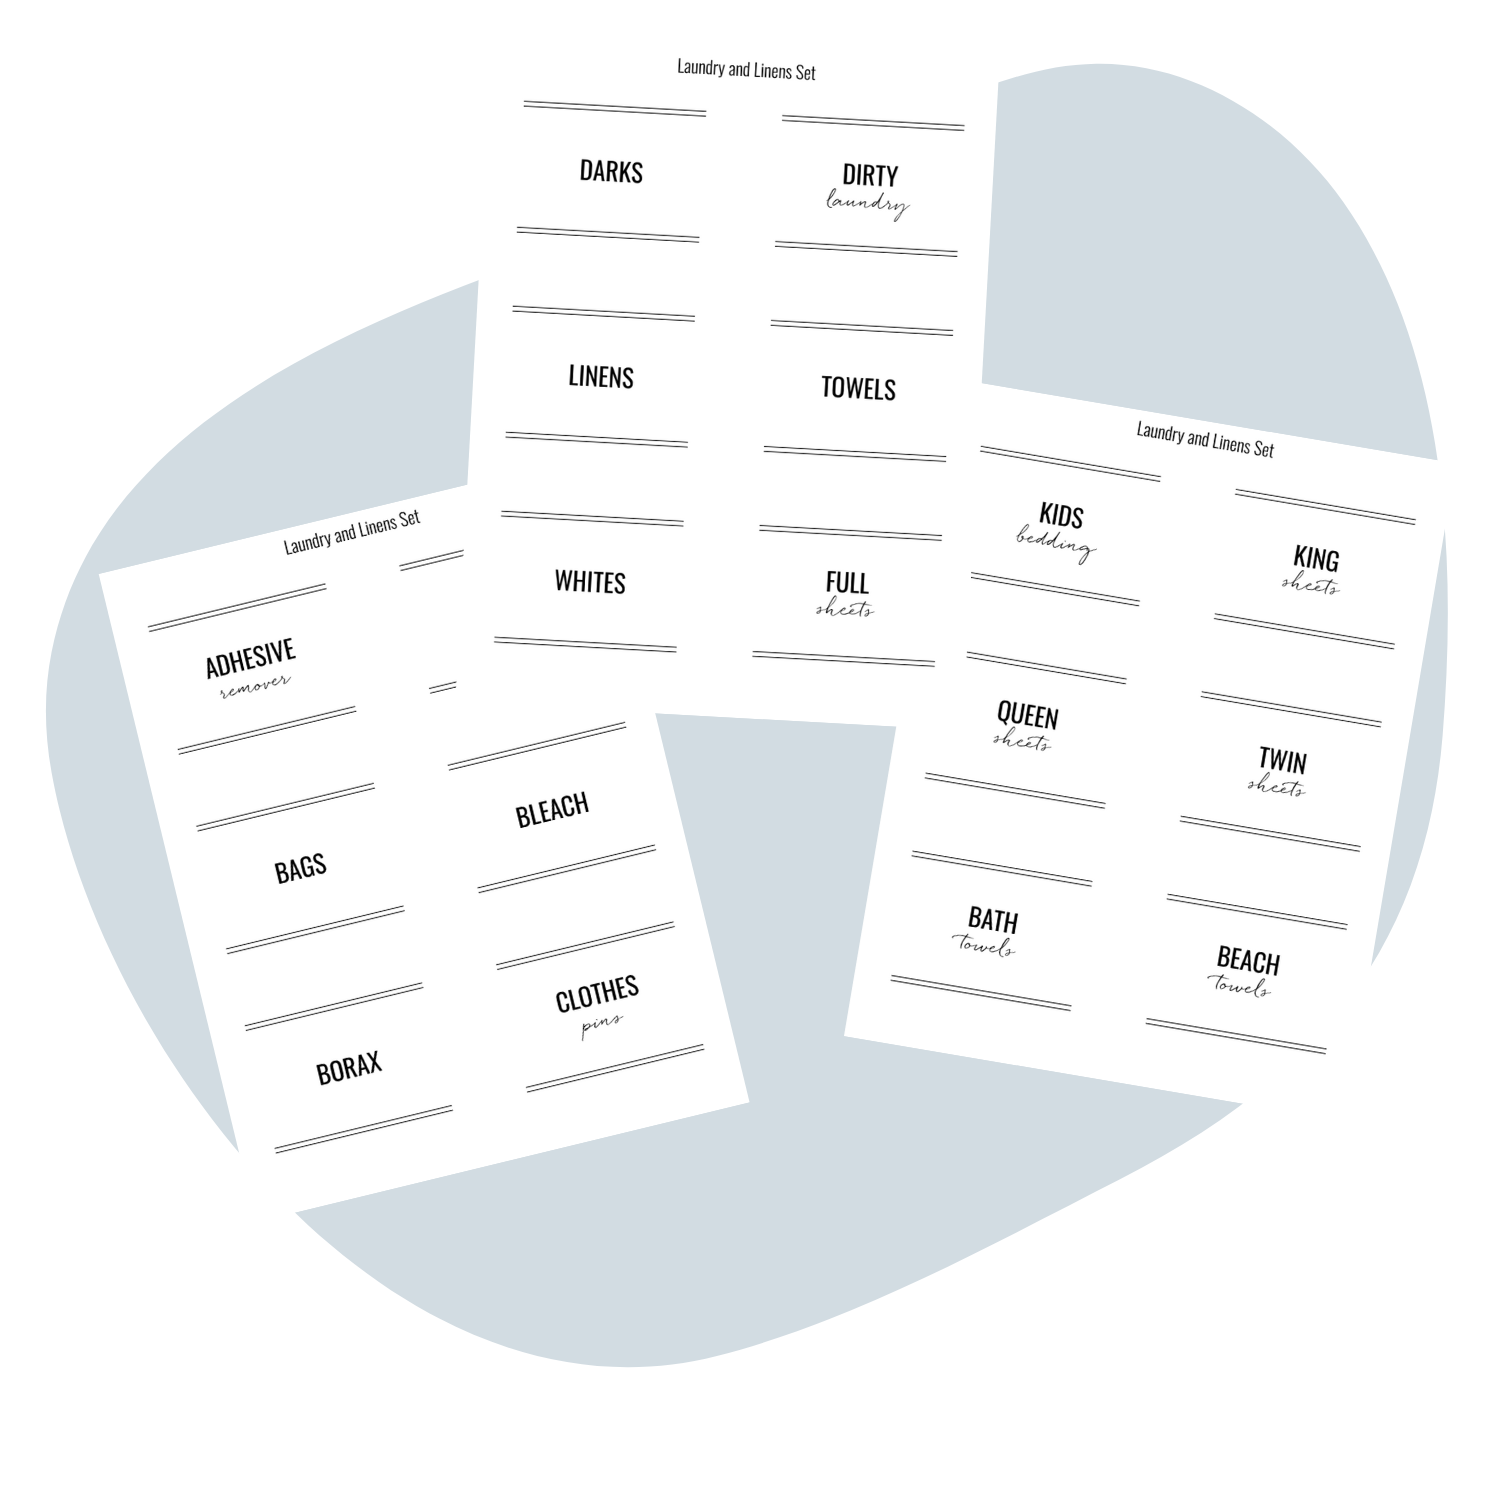 example pages of printable home laundry label set for organizing